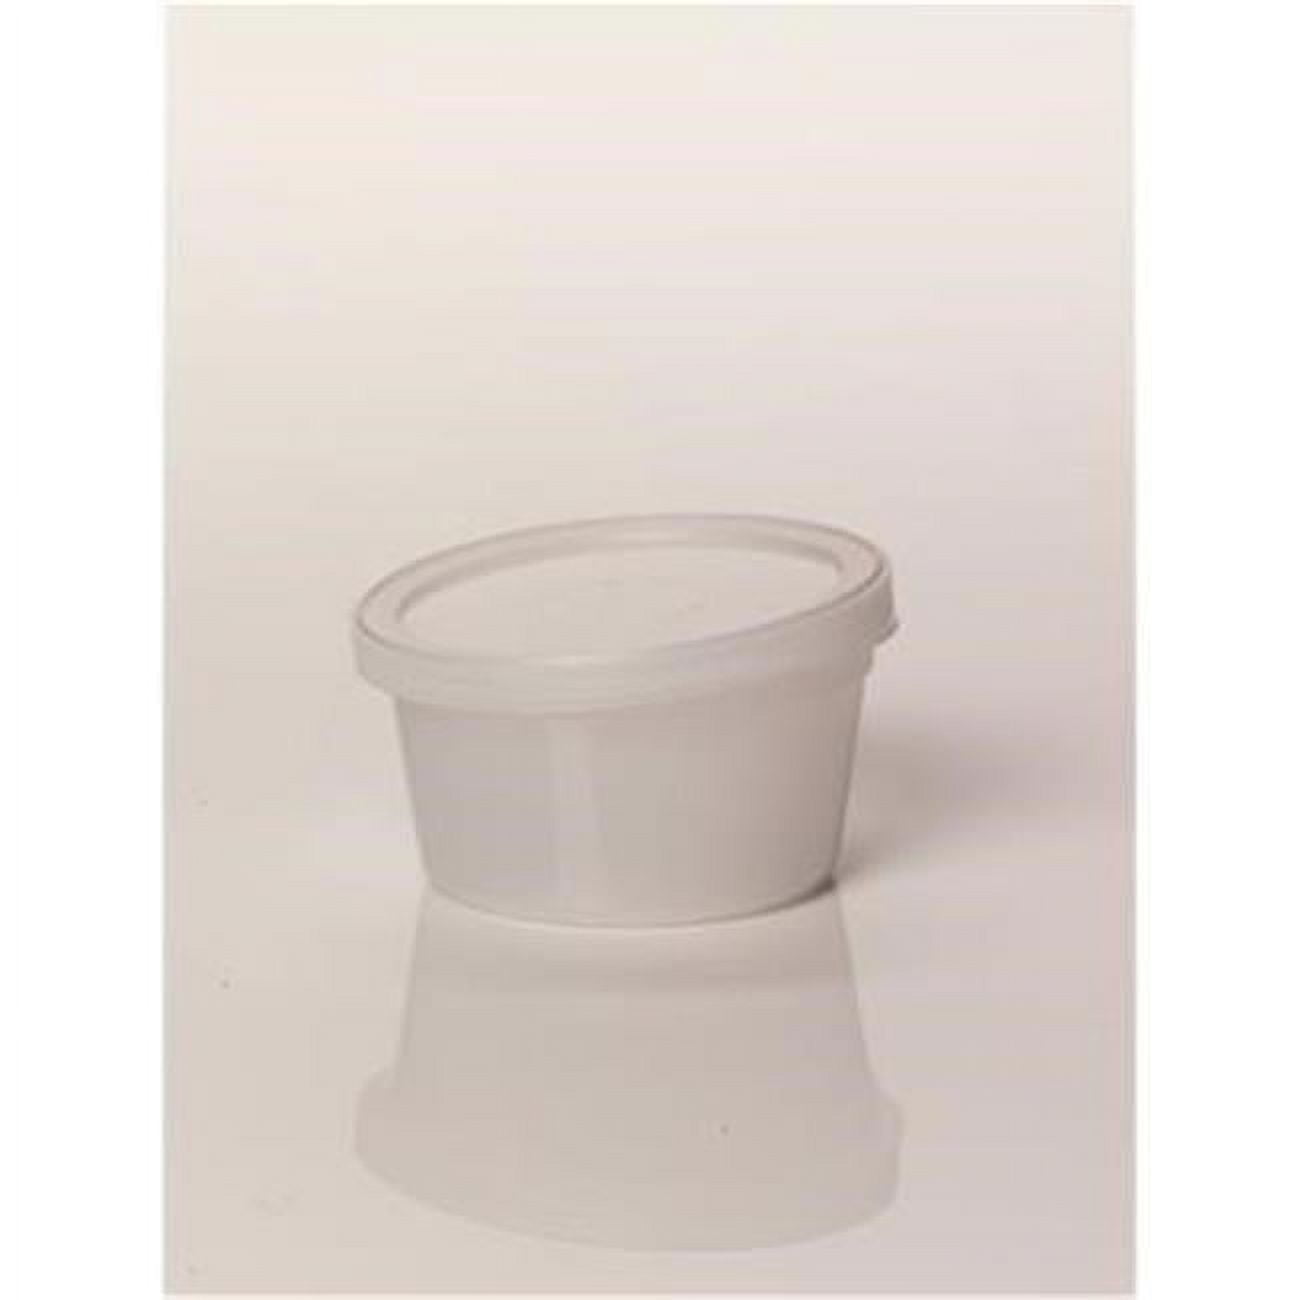 02cl168 168 Oz Hdpe Natural Container, Case Of 100